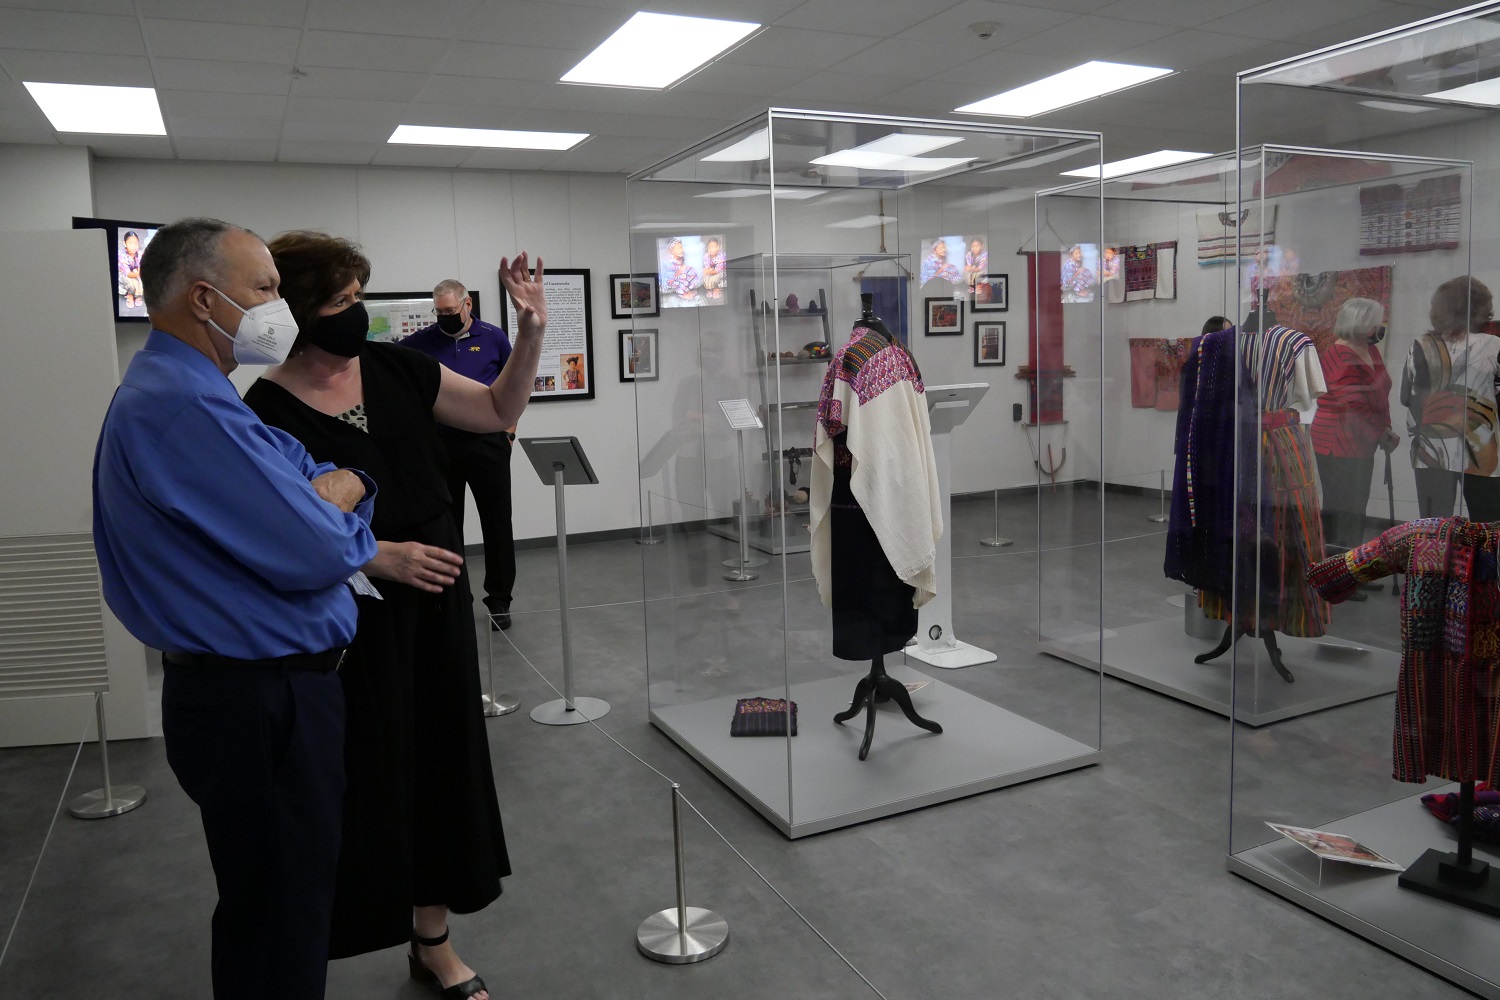 Attendees touring the exhibition